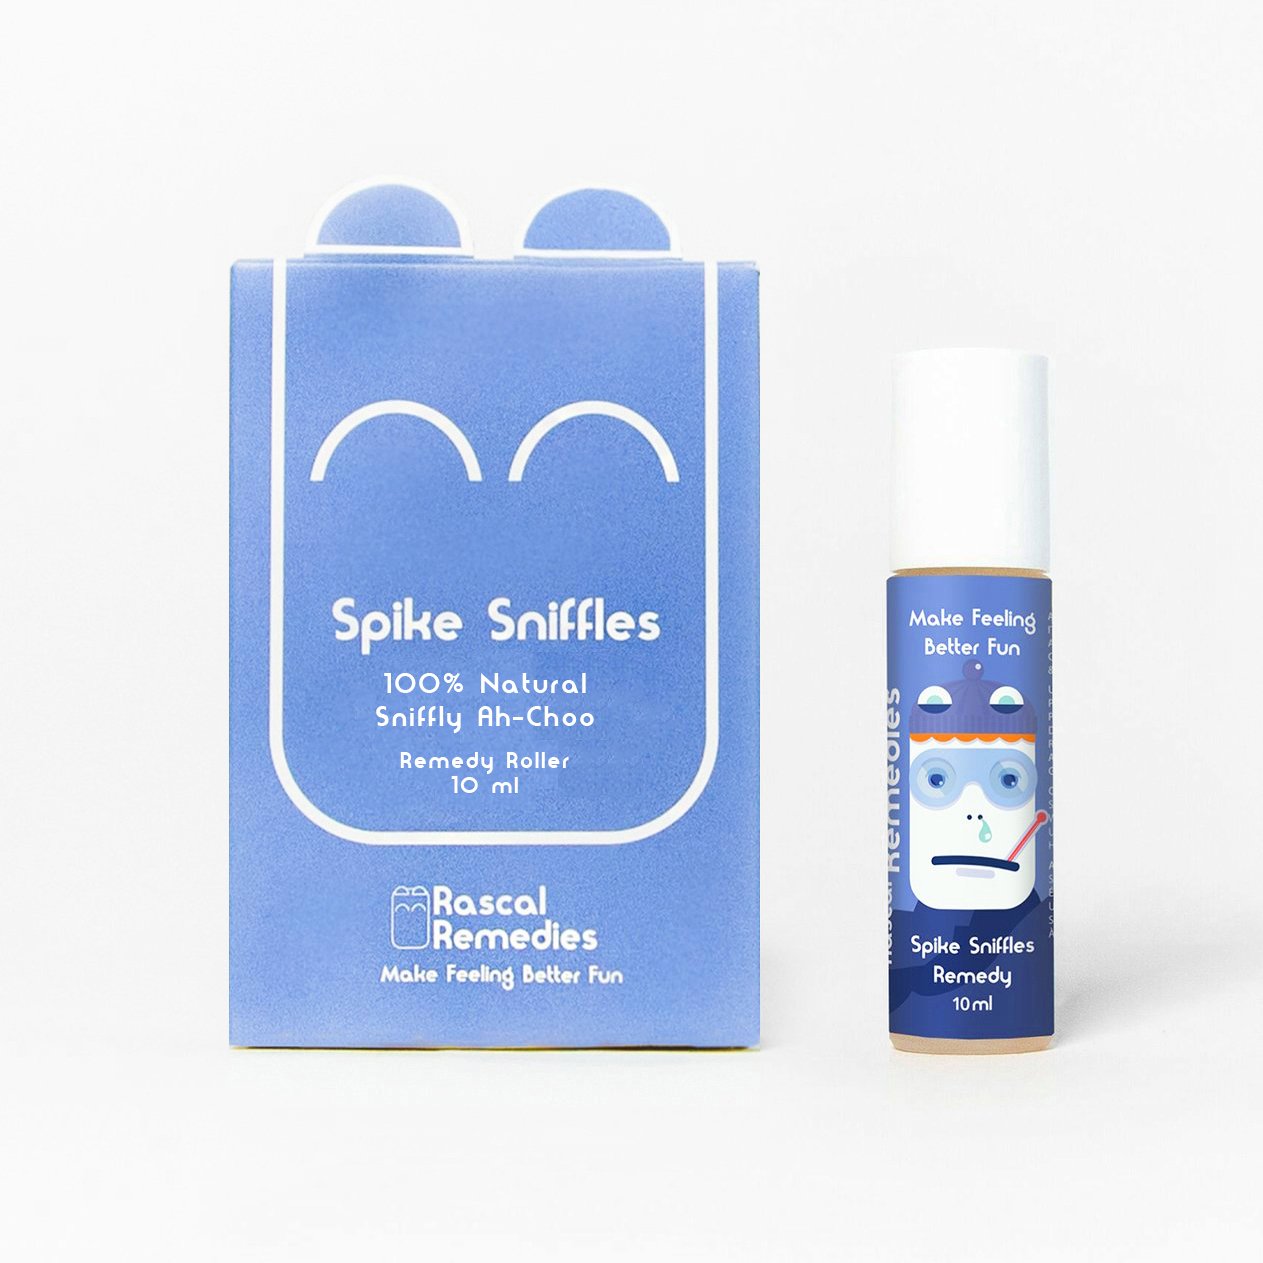 Mother Nature's Best Market Rascal Remedies Spike Sniffles: Sniffly Ah-choo Remedy All-Natural, Cruelty-Free, Gluten-Free, Vegan